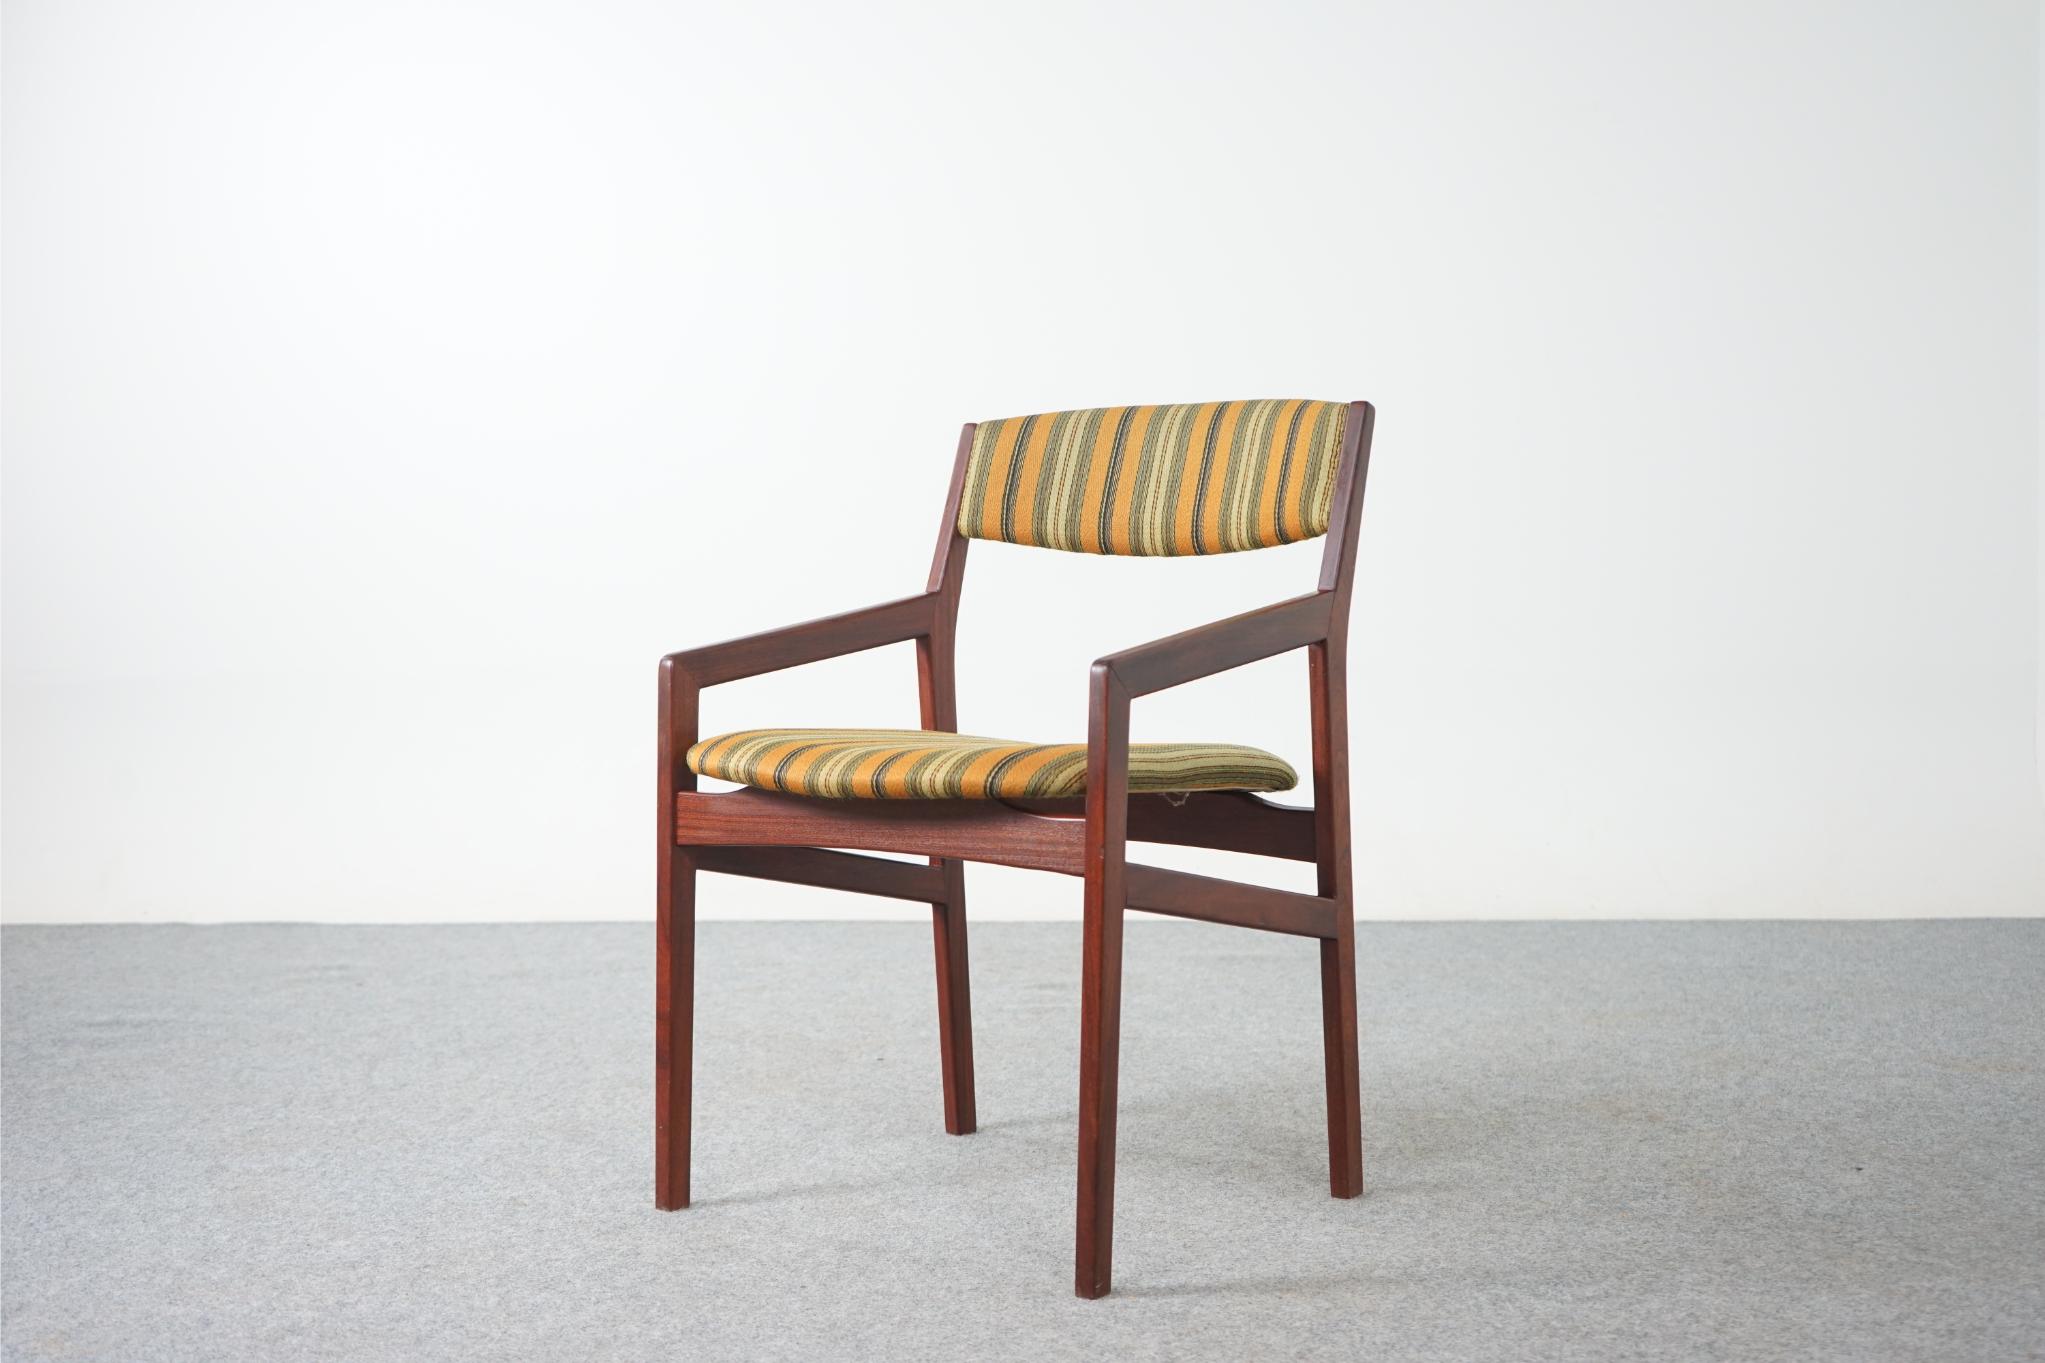 Teak Danish dining chairs, circa 1960's. Solid Afromosia frames feature cross braces for added stability and support. Floating seat design adds an air of lightness and elegance to the frame. Low arms create a charming geometric silhouette. Original